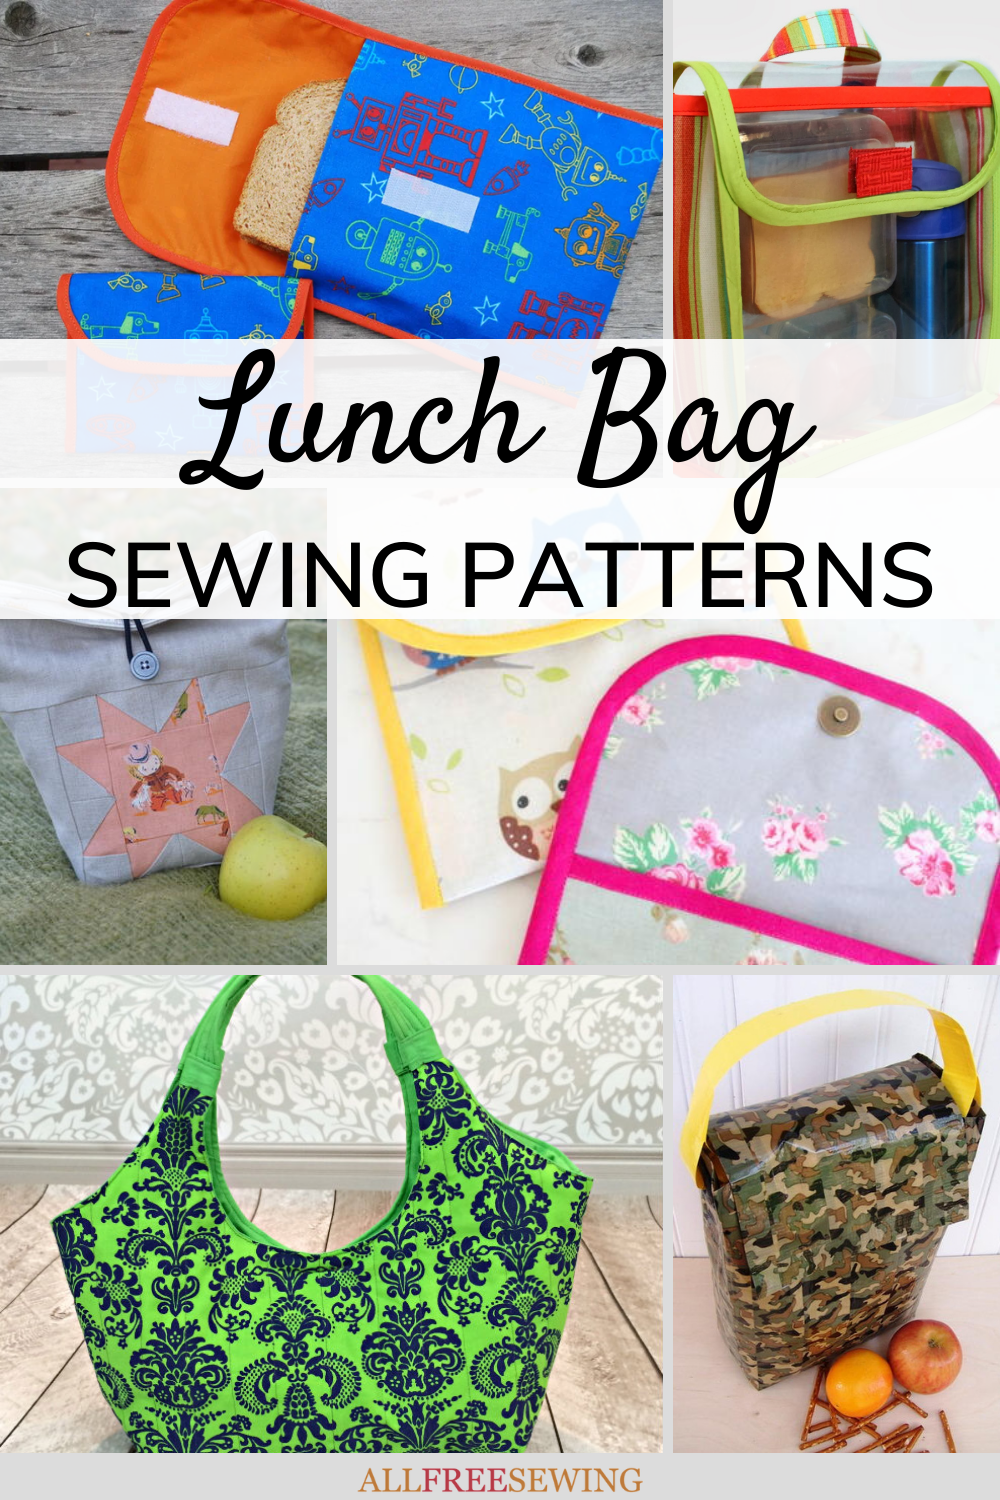 Tiffin Double Compartment Lunch Tote Sewing Pattern — RLR Creations